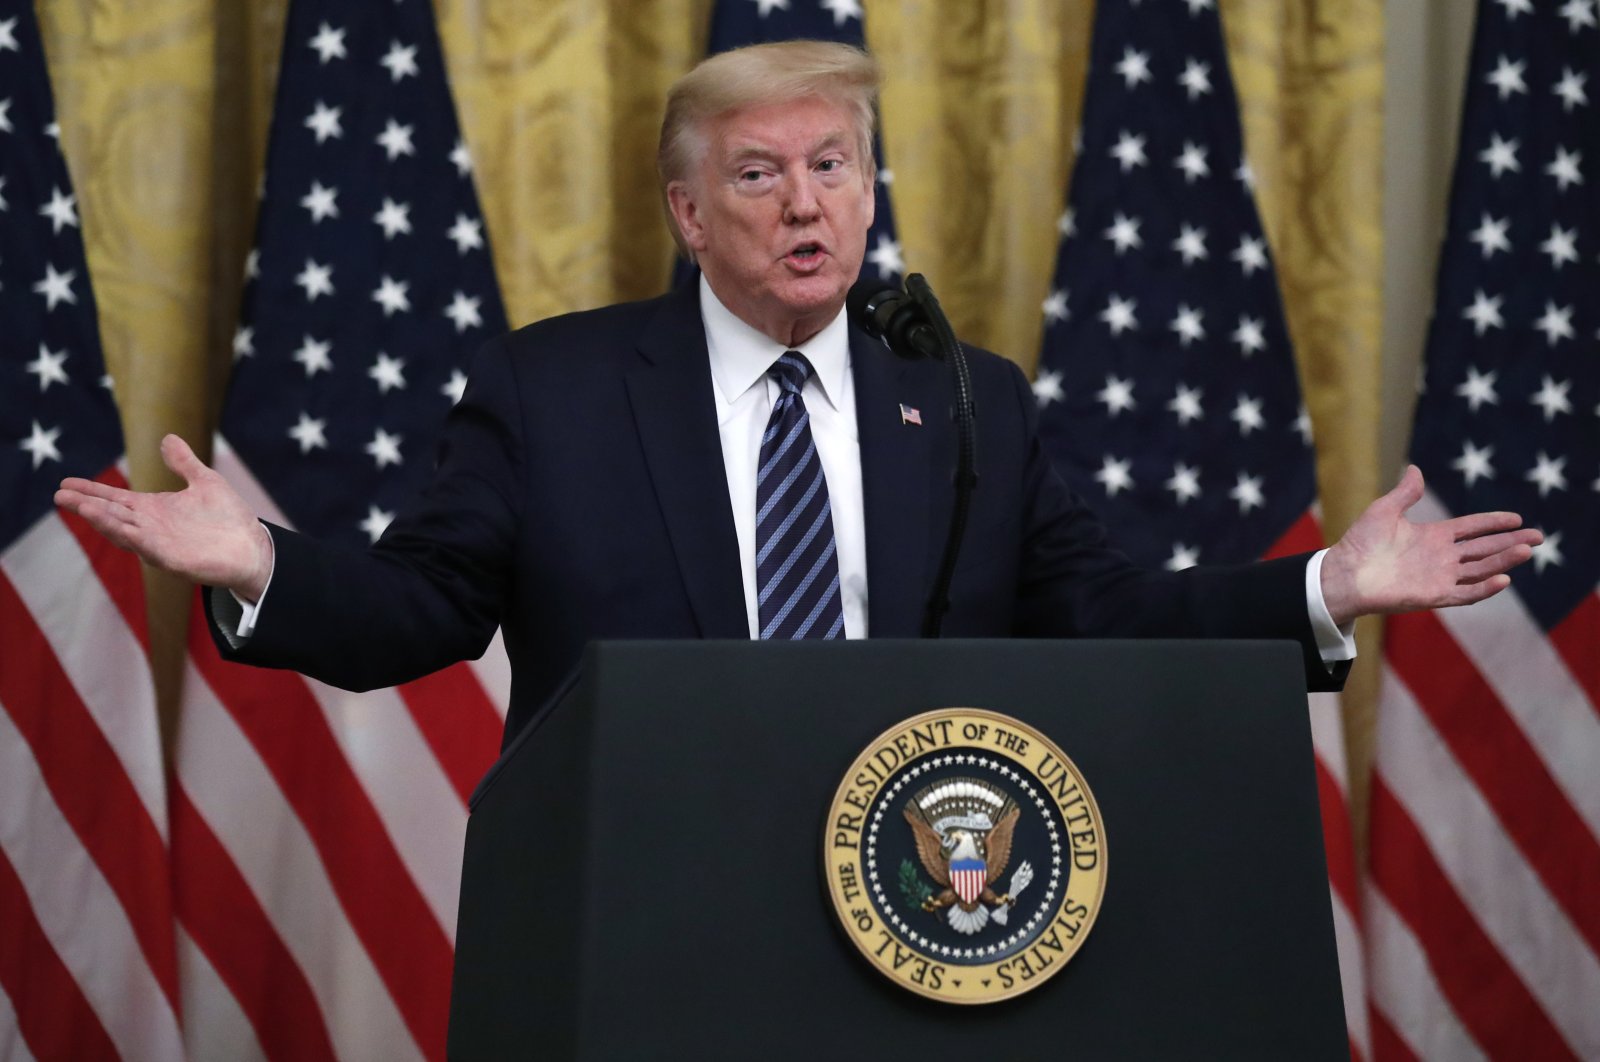 President Donald Trump answers questions from reporters during a event about protecting seniors, in the East Room of the White House, Thursday, April 30, 2020, in Washington. (AP Photo)